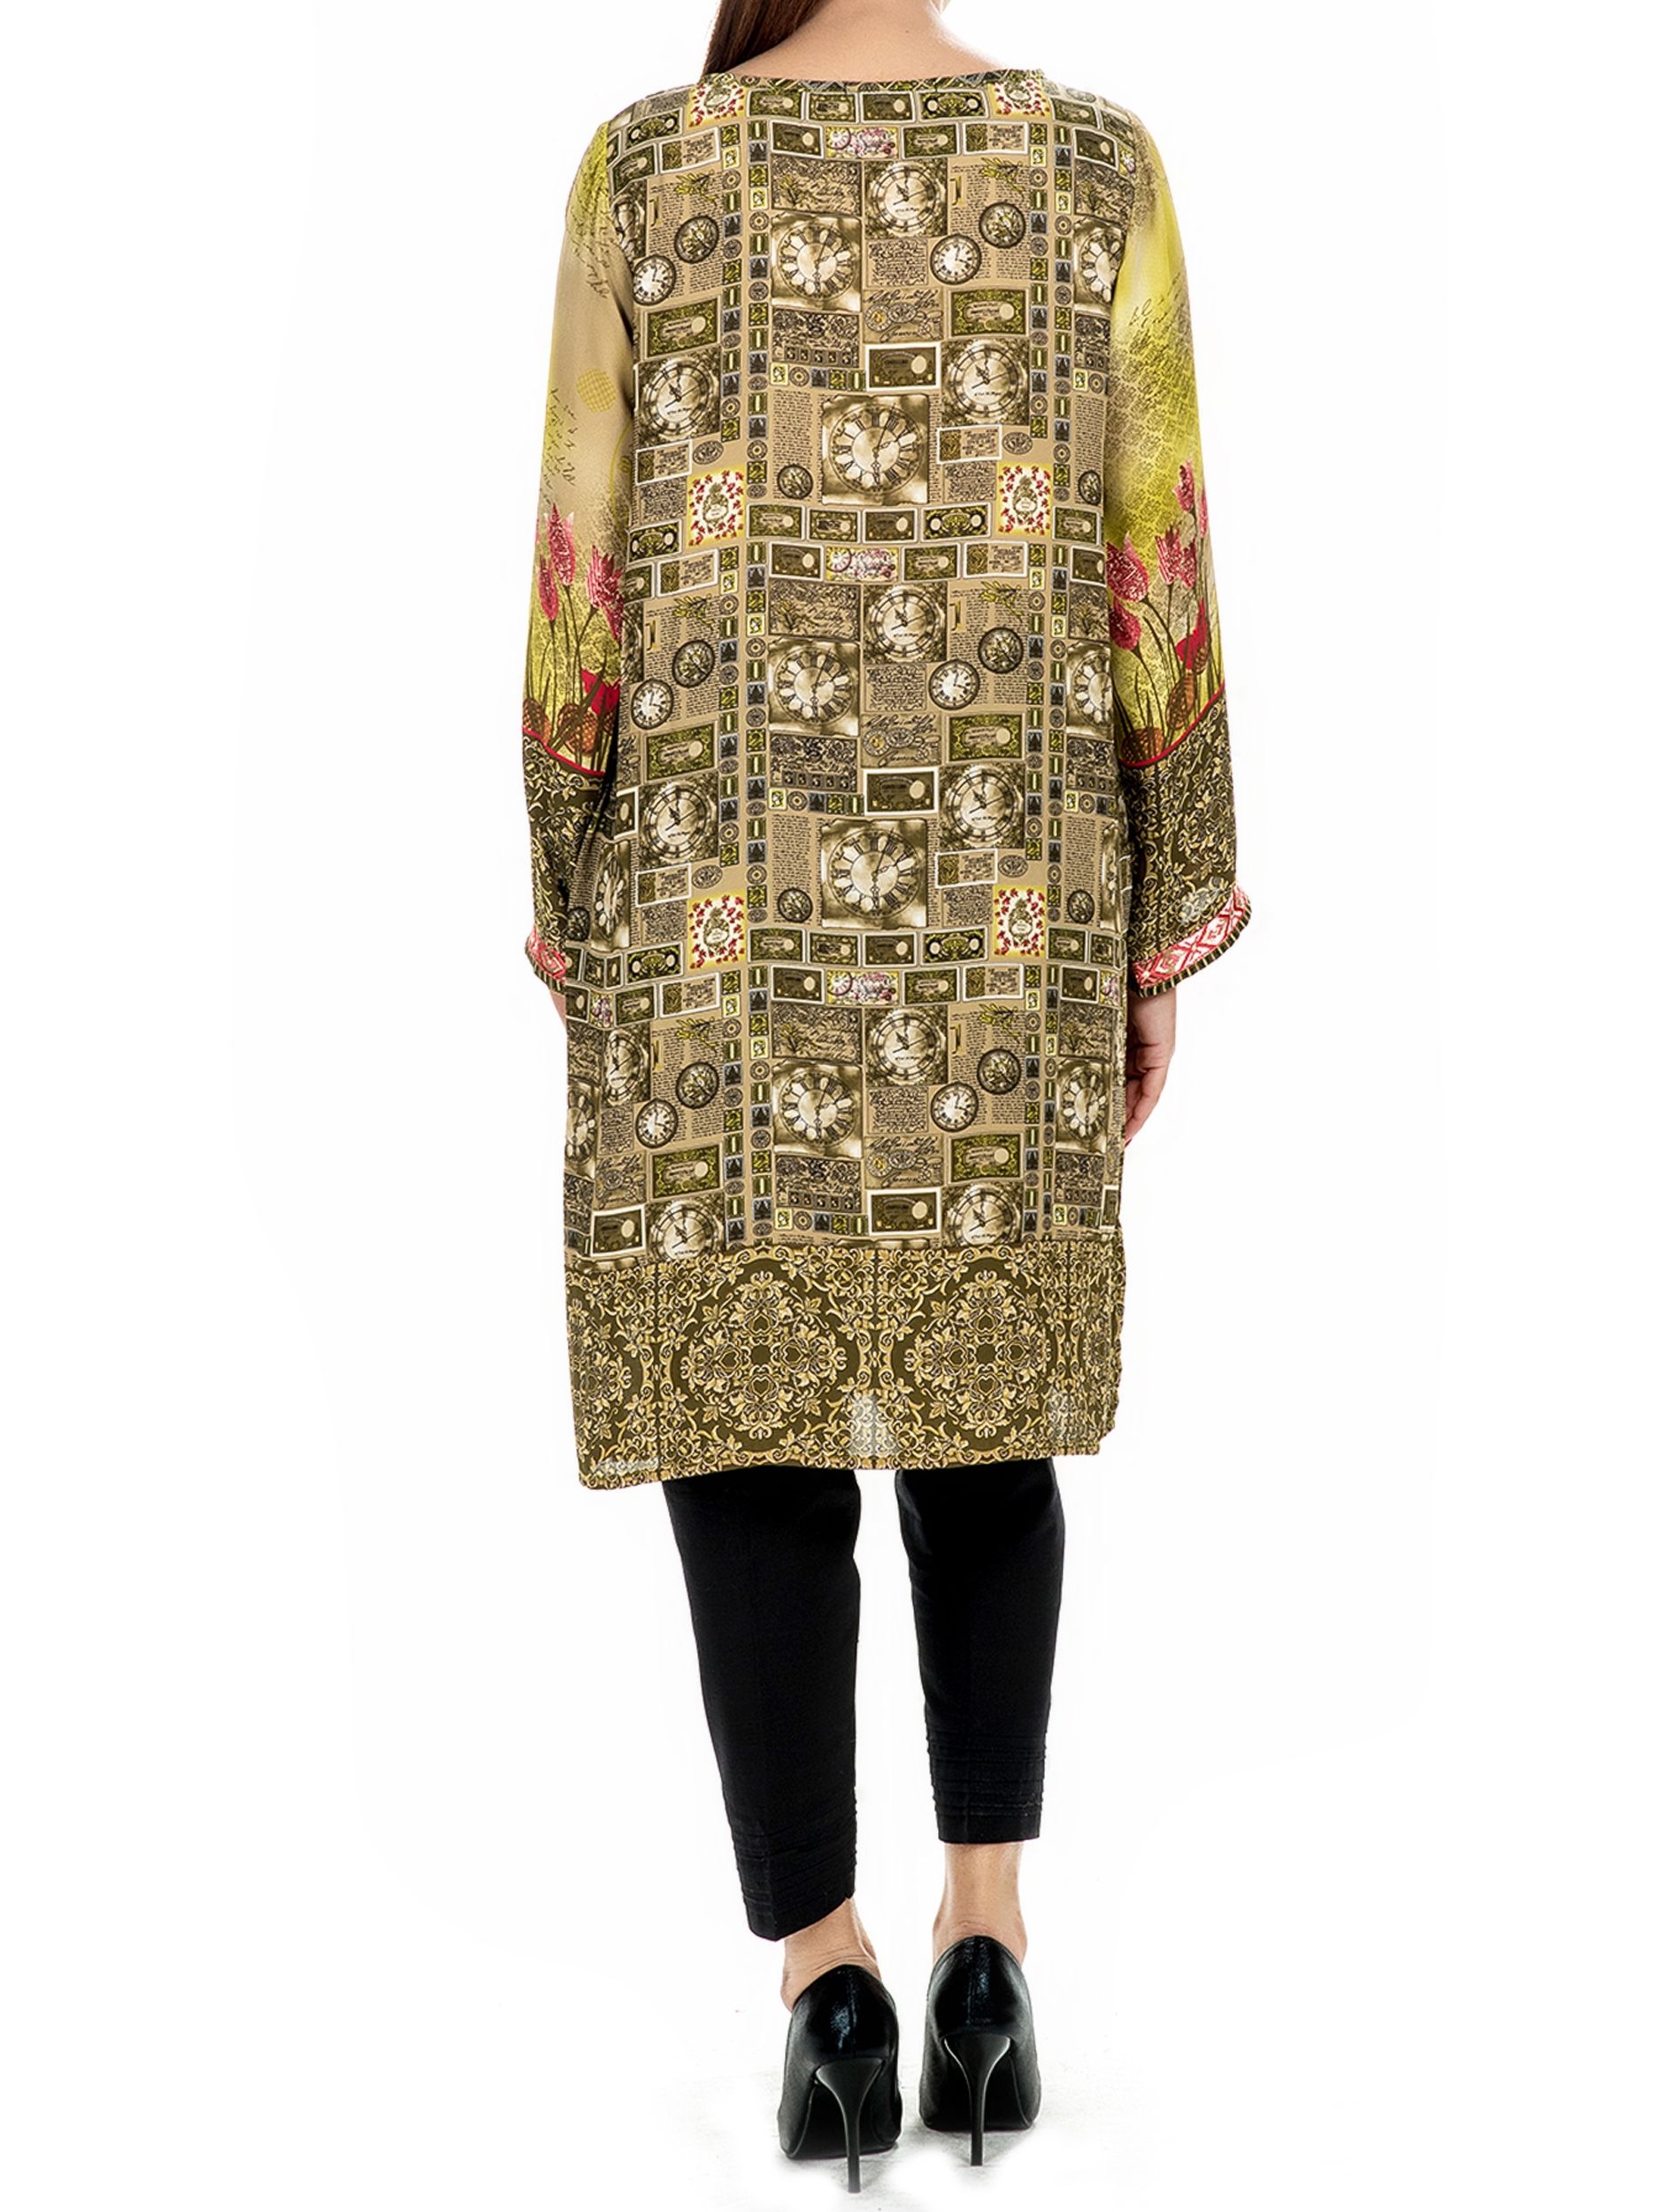 Printed grip shirt in green by lime light kurti collection 2019